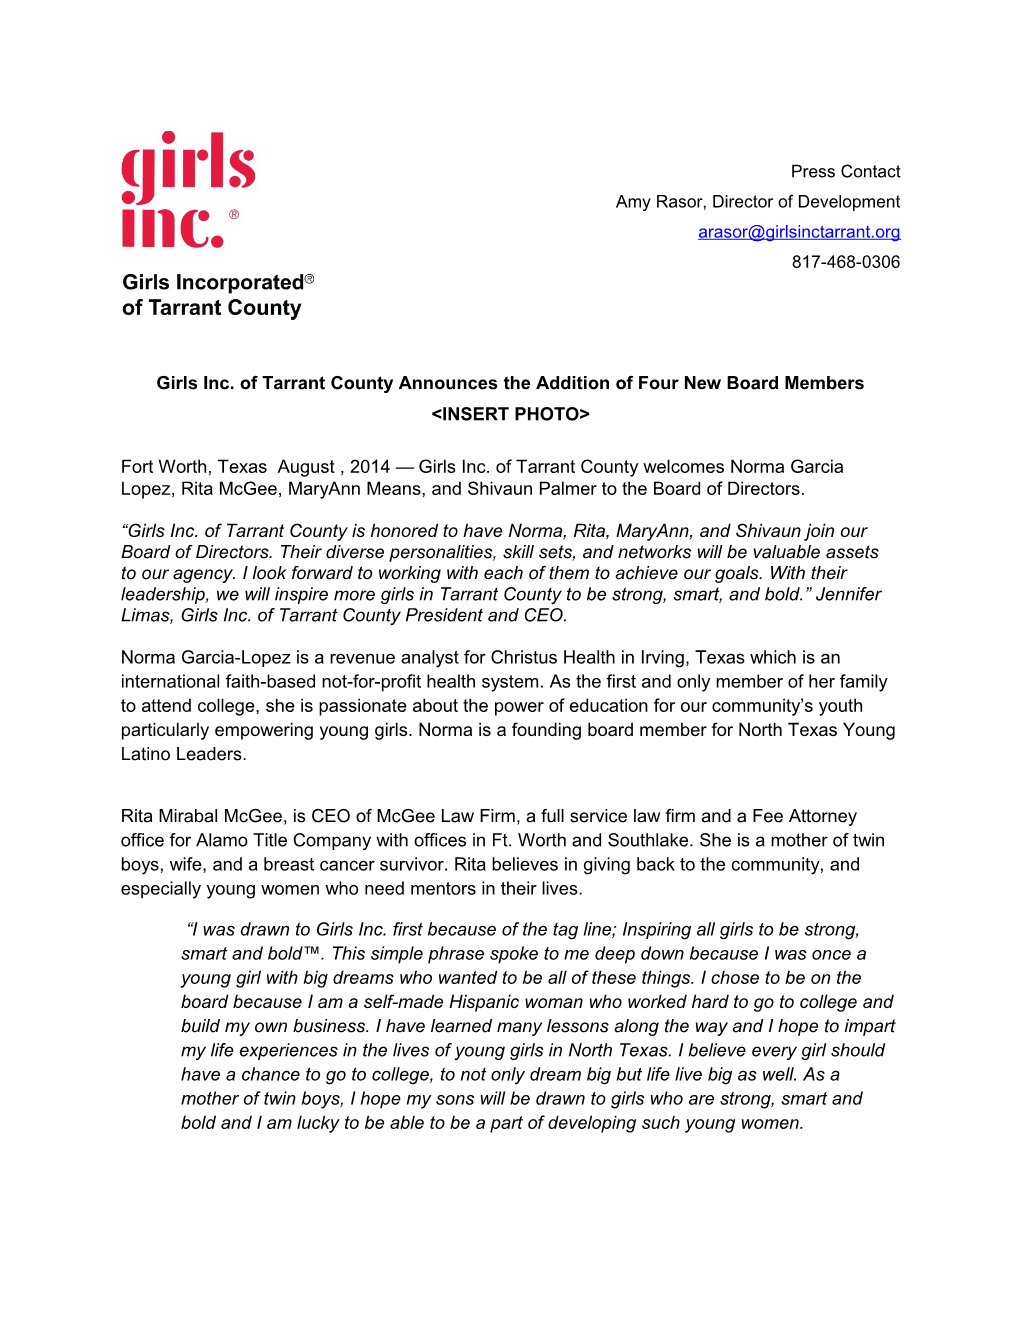 Girls Inc. Oftarrant County Announces the Addition of Four New Board Members